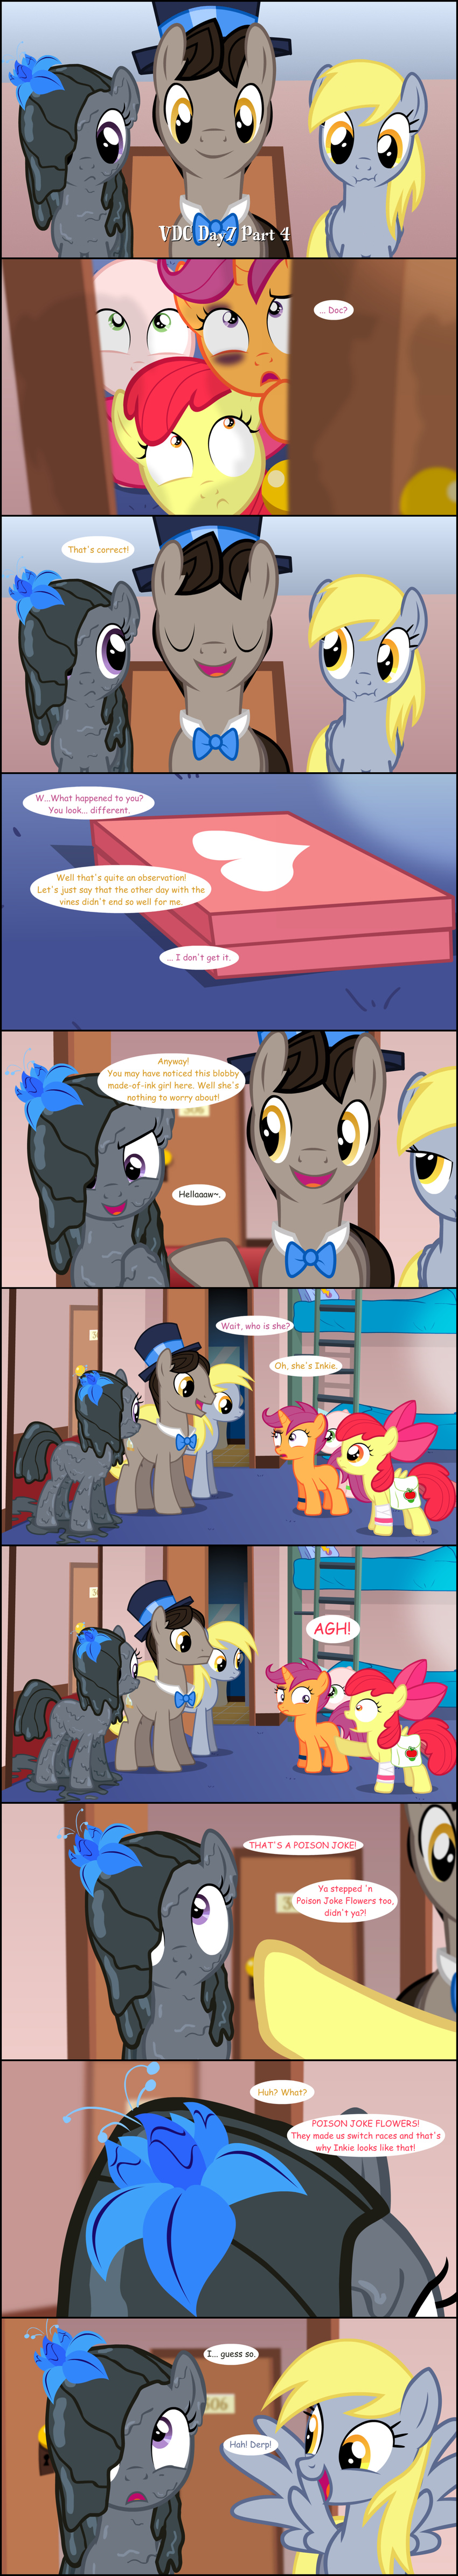 bald comic cutie_mark_crusaders_(mlp) derpy_hooves_(mlp) doctor_whooves_(mlp) equine female feral friendship_is_magic horn horse inkie_pie_(mlp) jananimations mammal my_little_pony pegasus poison_joke pony scootaloo_(mlp) shiner shocked smile sweetie_belle_(mlp) tumblr unicorn wings young